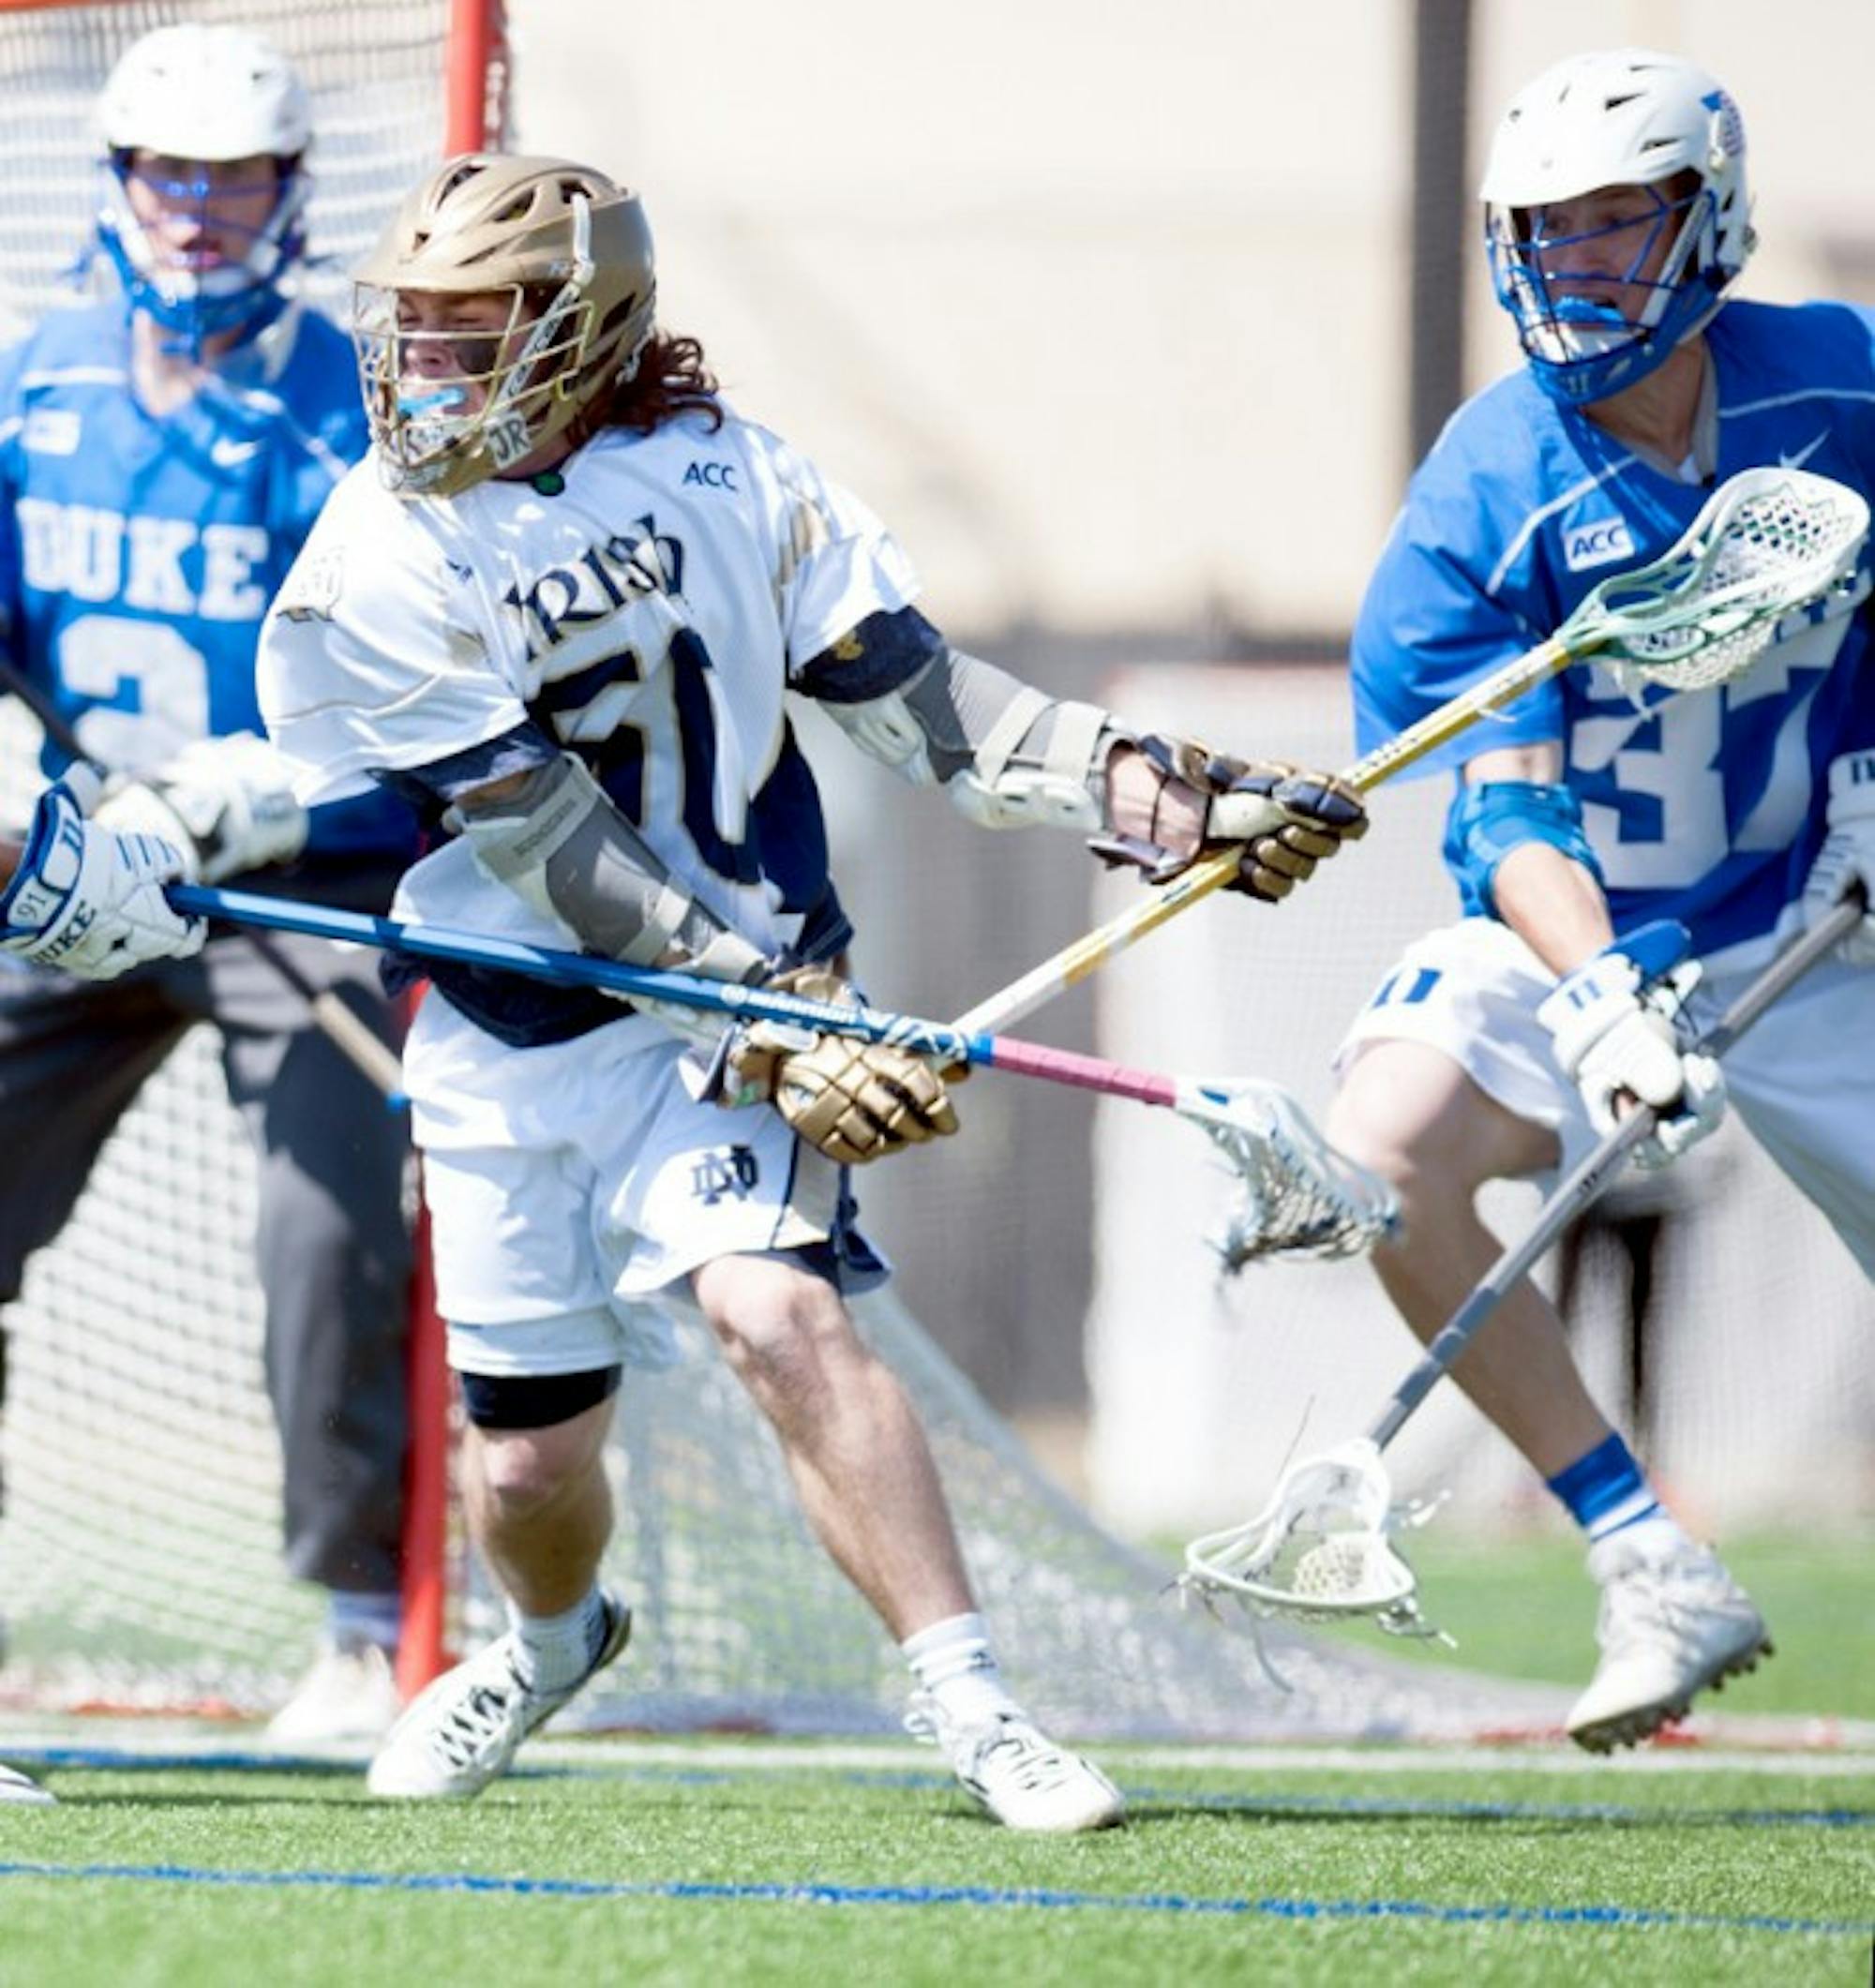 Sophomore attack Matt Kavanagh attempts to break through two Duke defenders in the 15-7 Irish loss April 5. The game was one of only two this season in which Kavanagh did not score a point.